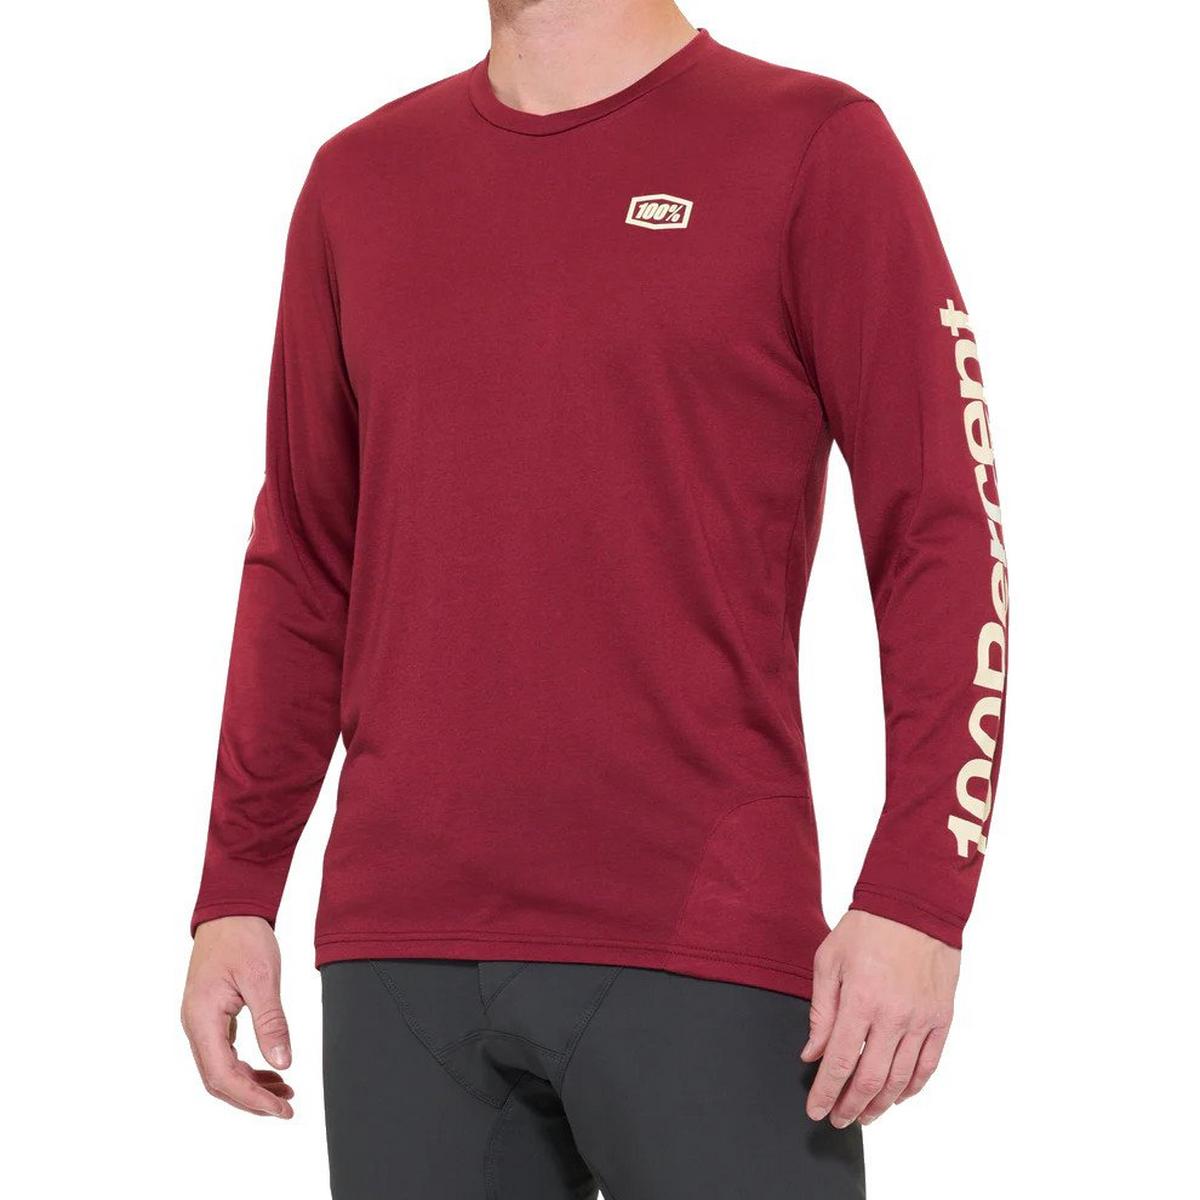 100% Men's Airmatic Long-Sleeve Jersey - Red